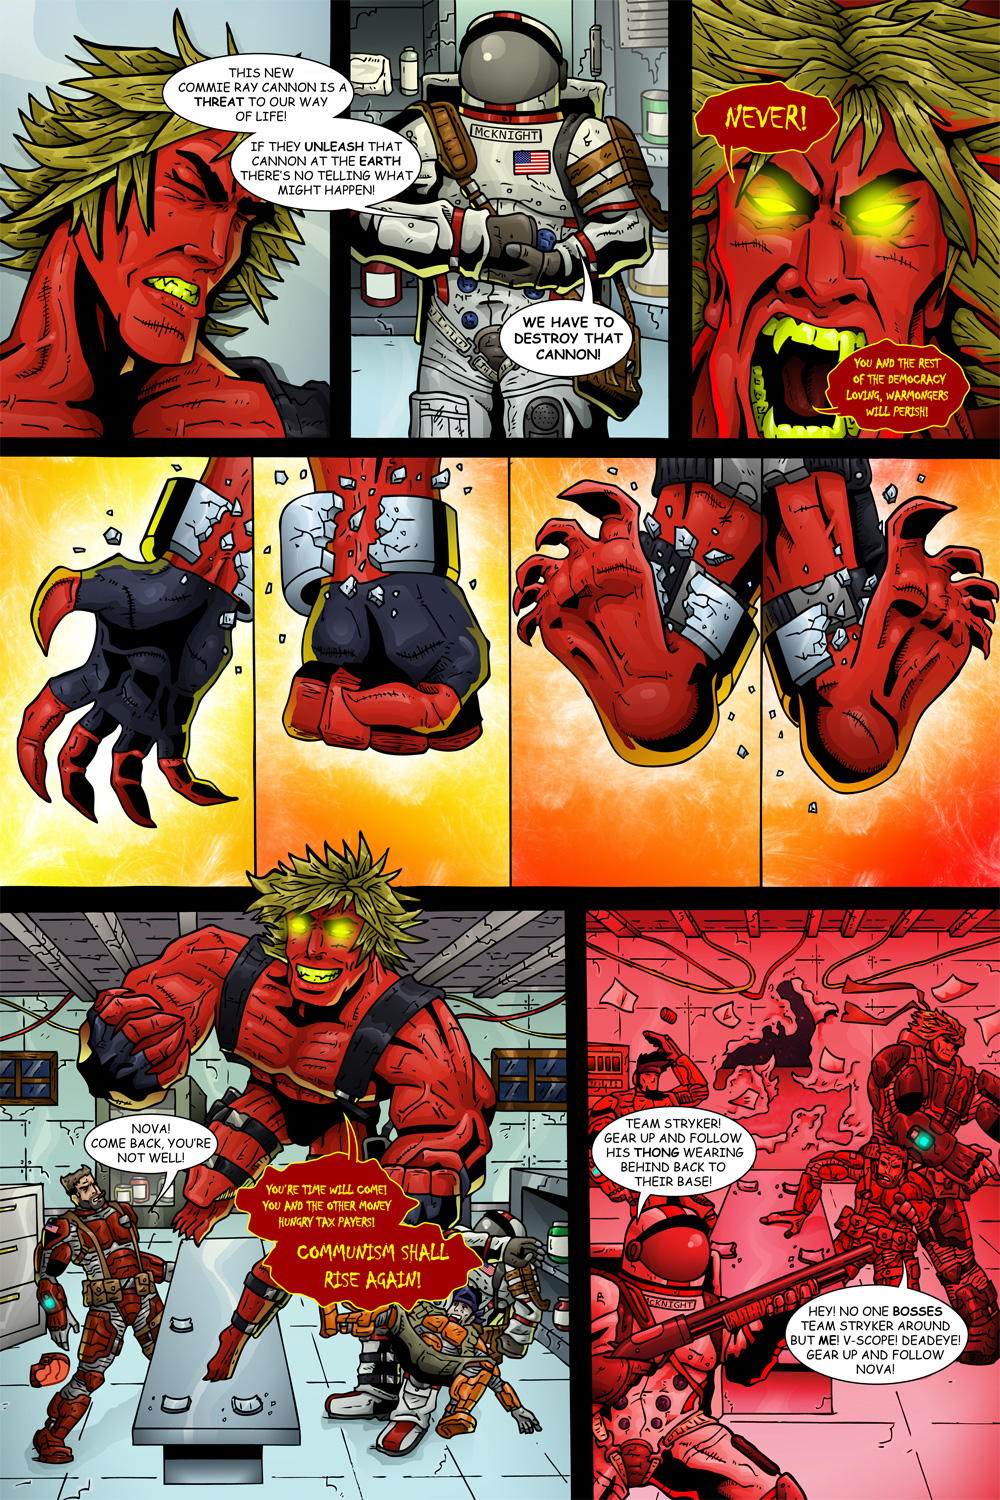 MISSION 006: PAGE 17 “MONEY HUNGRY TAX PAYERS!”